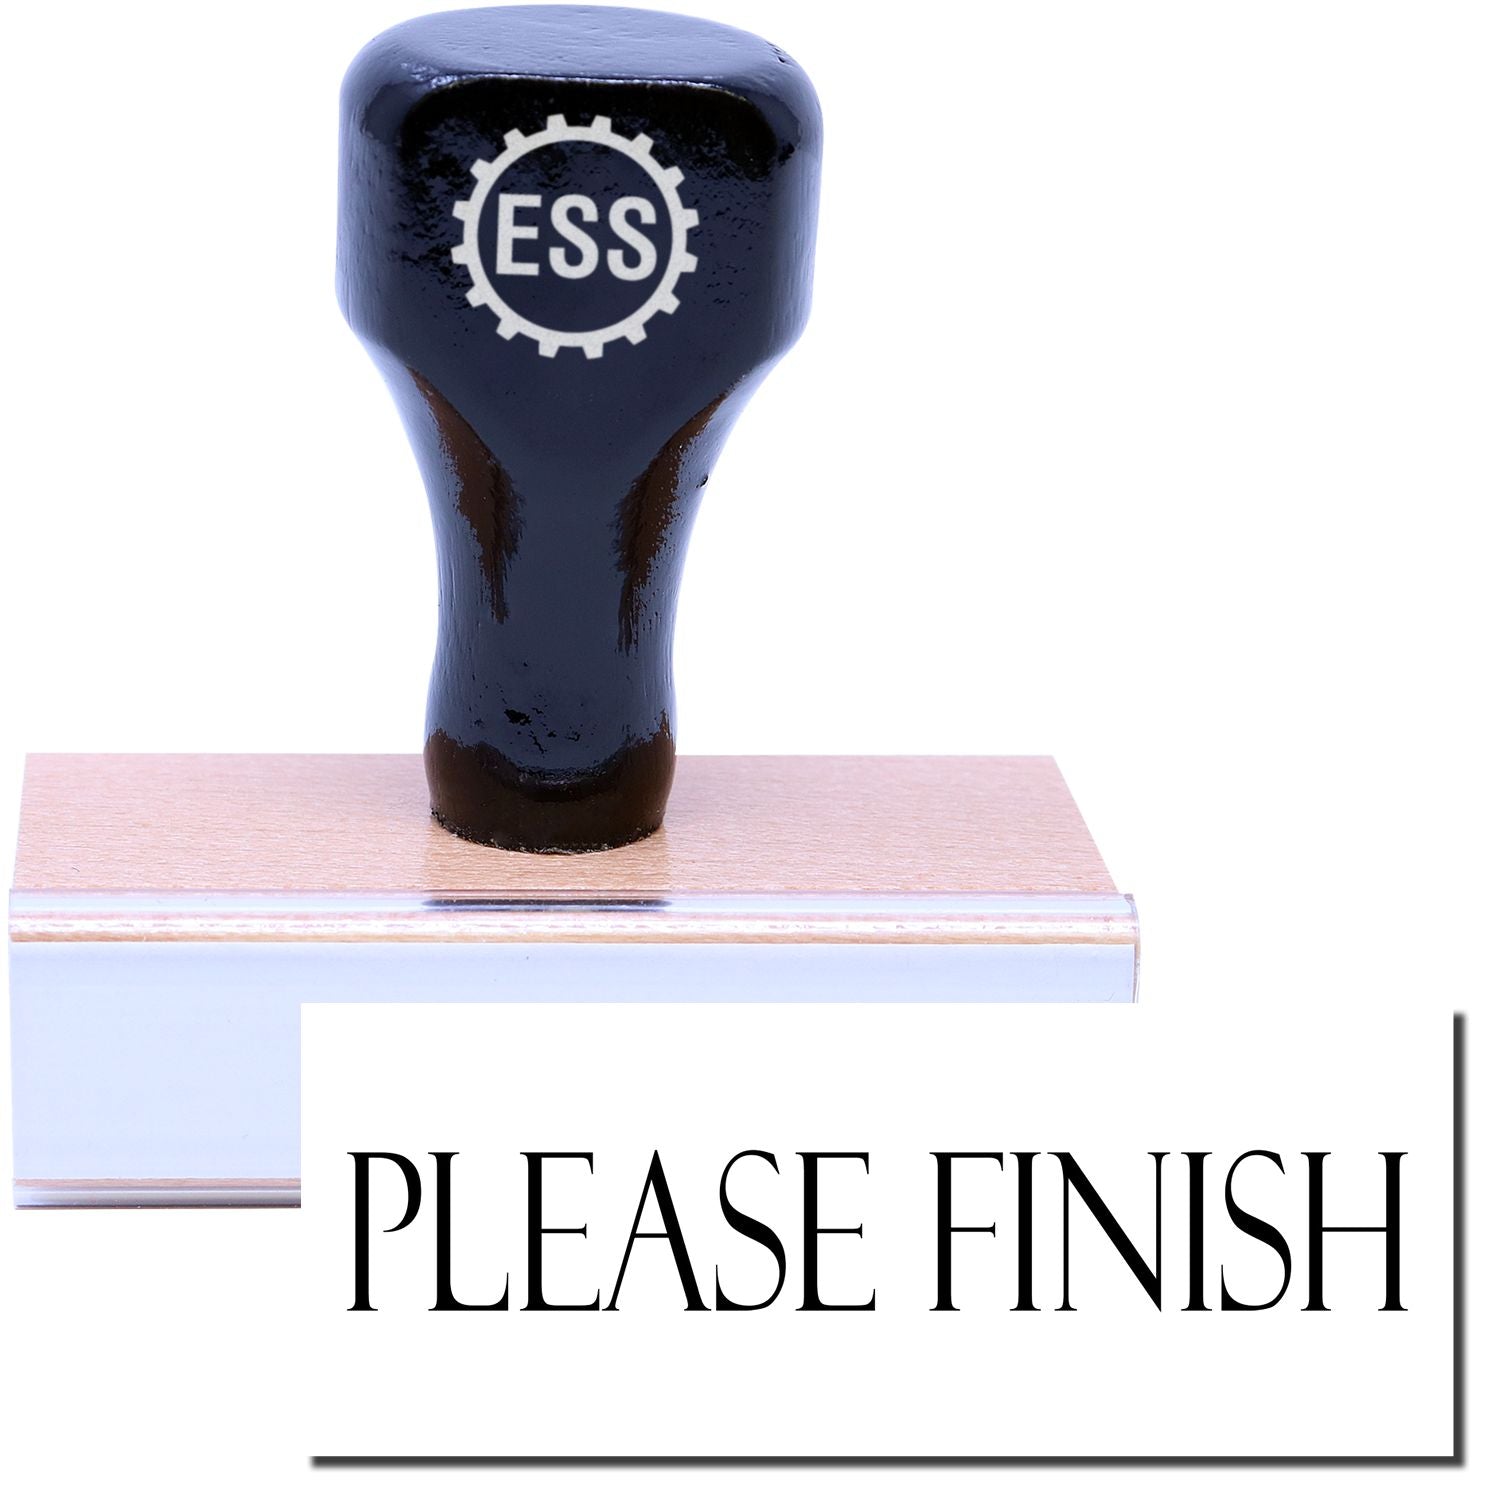 A stock office rubber stamp with a stamped image showing how the text "PLEASE FINISH" in a large font is displayed after stamping.